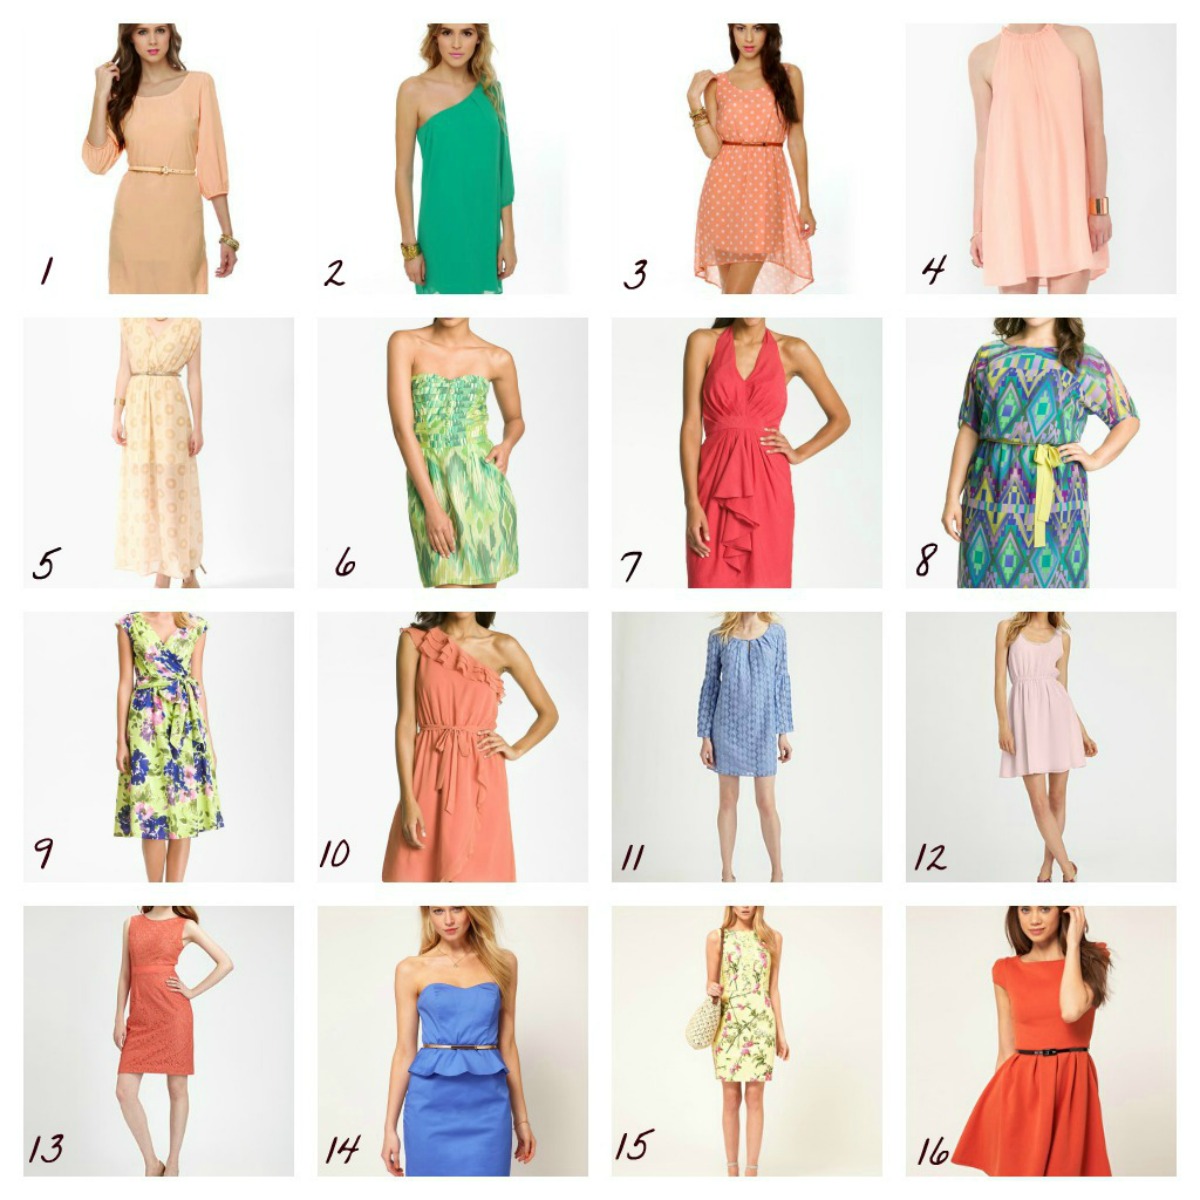 outfits to wear to a summer wedding